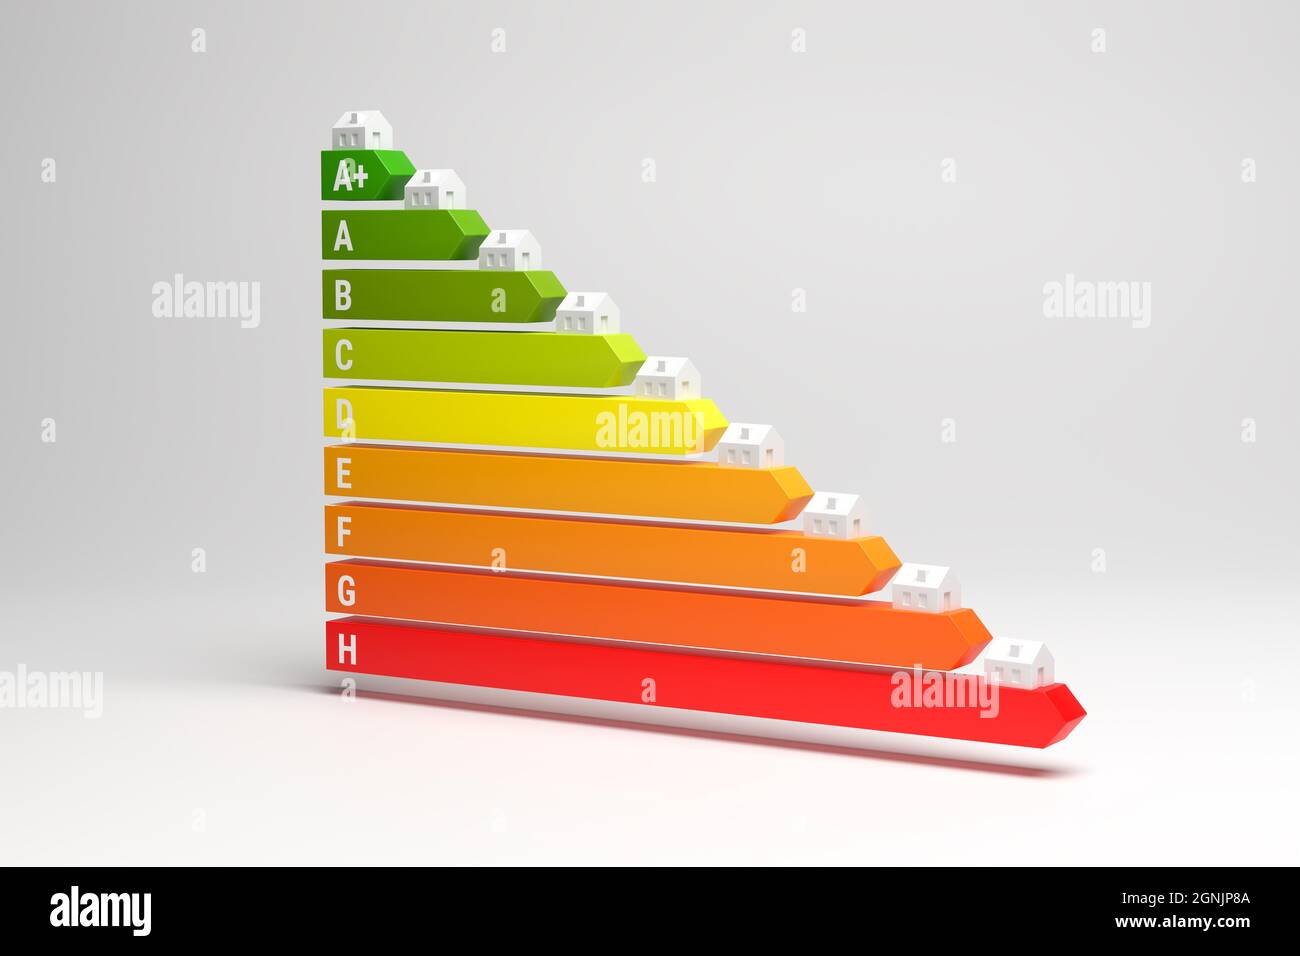 Energy Labels for houses in Germany (Energy Efficiency Classes A+ to H) concept. Model houses on the energy label arrows. Stock Photo